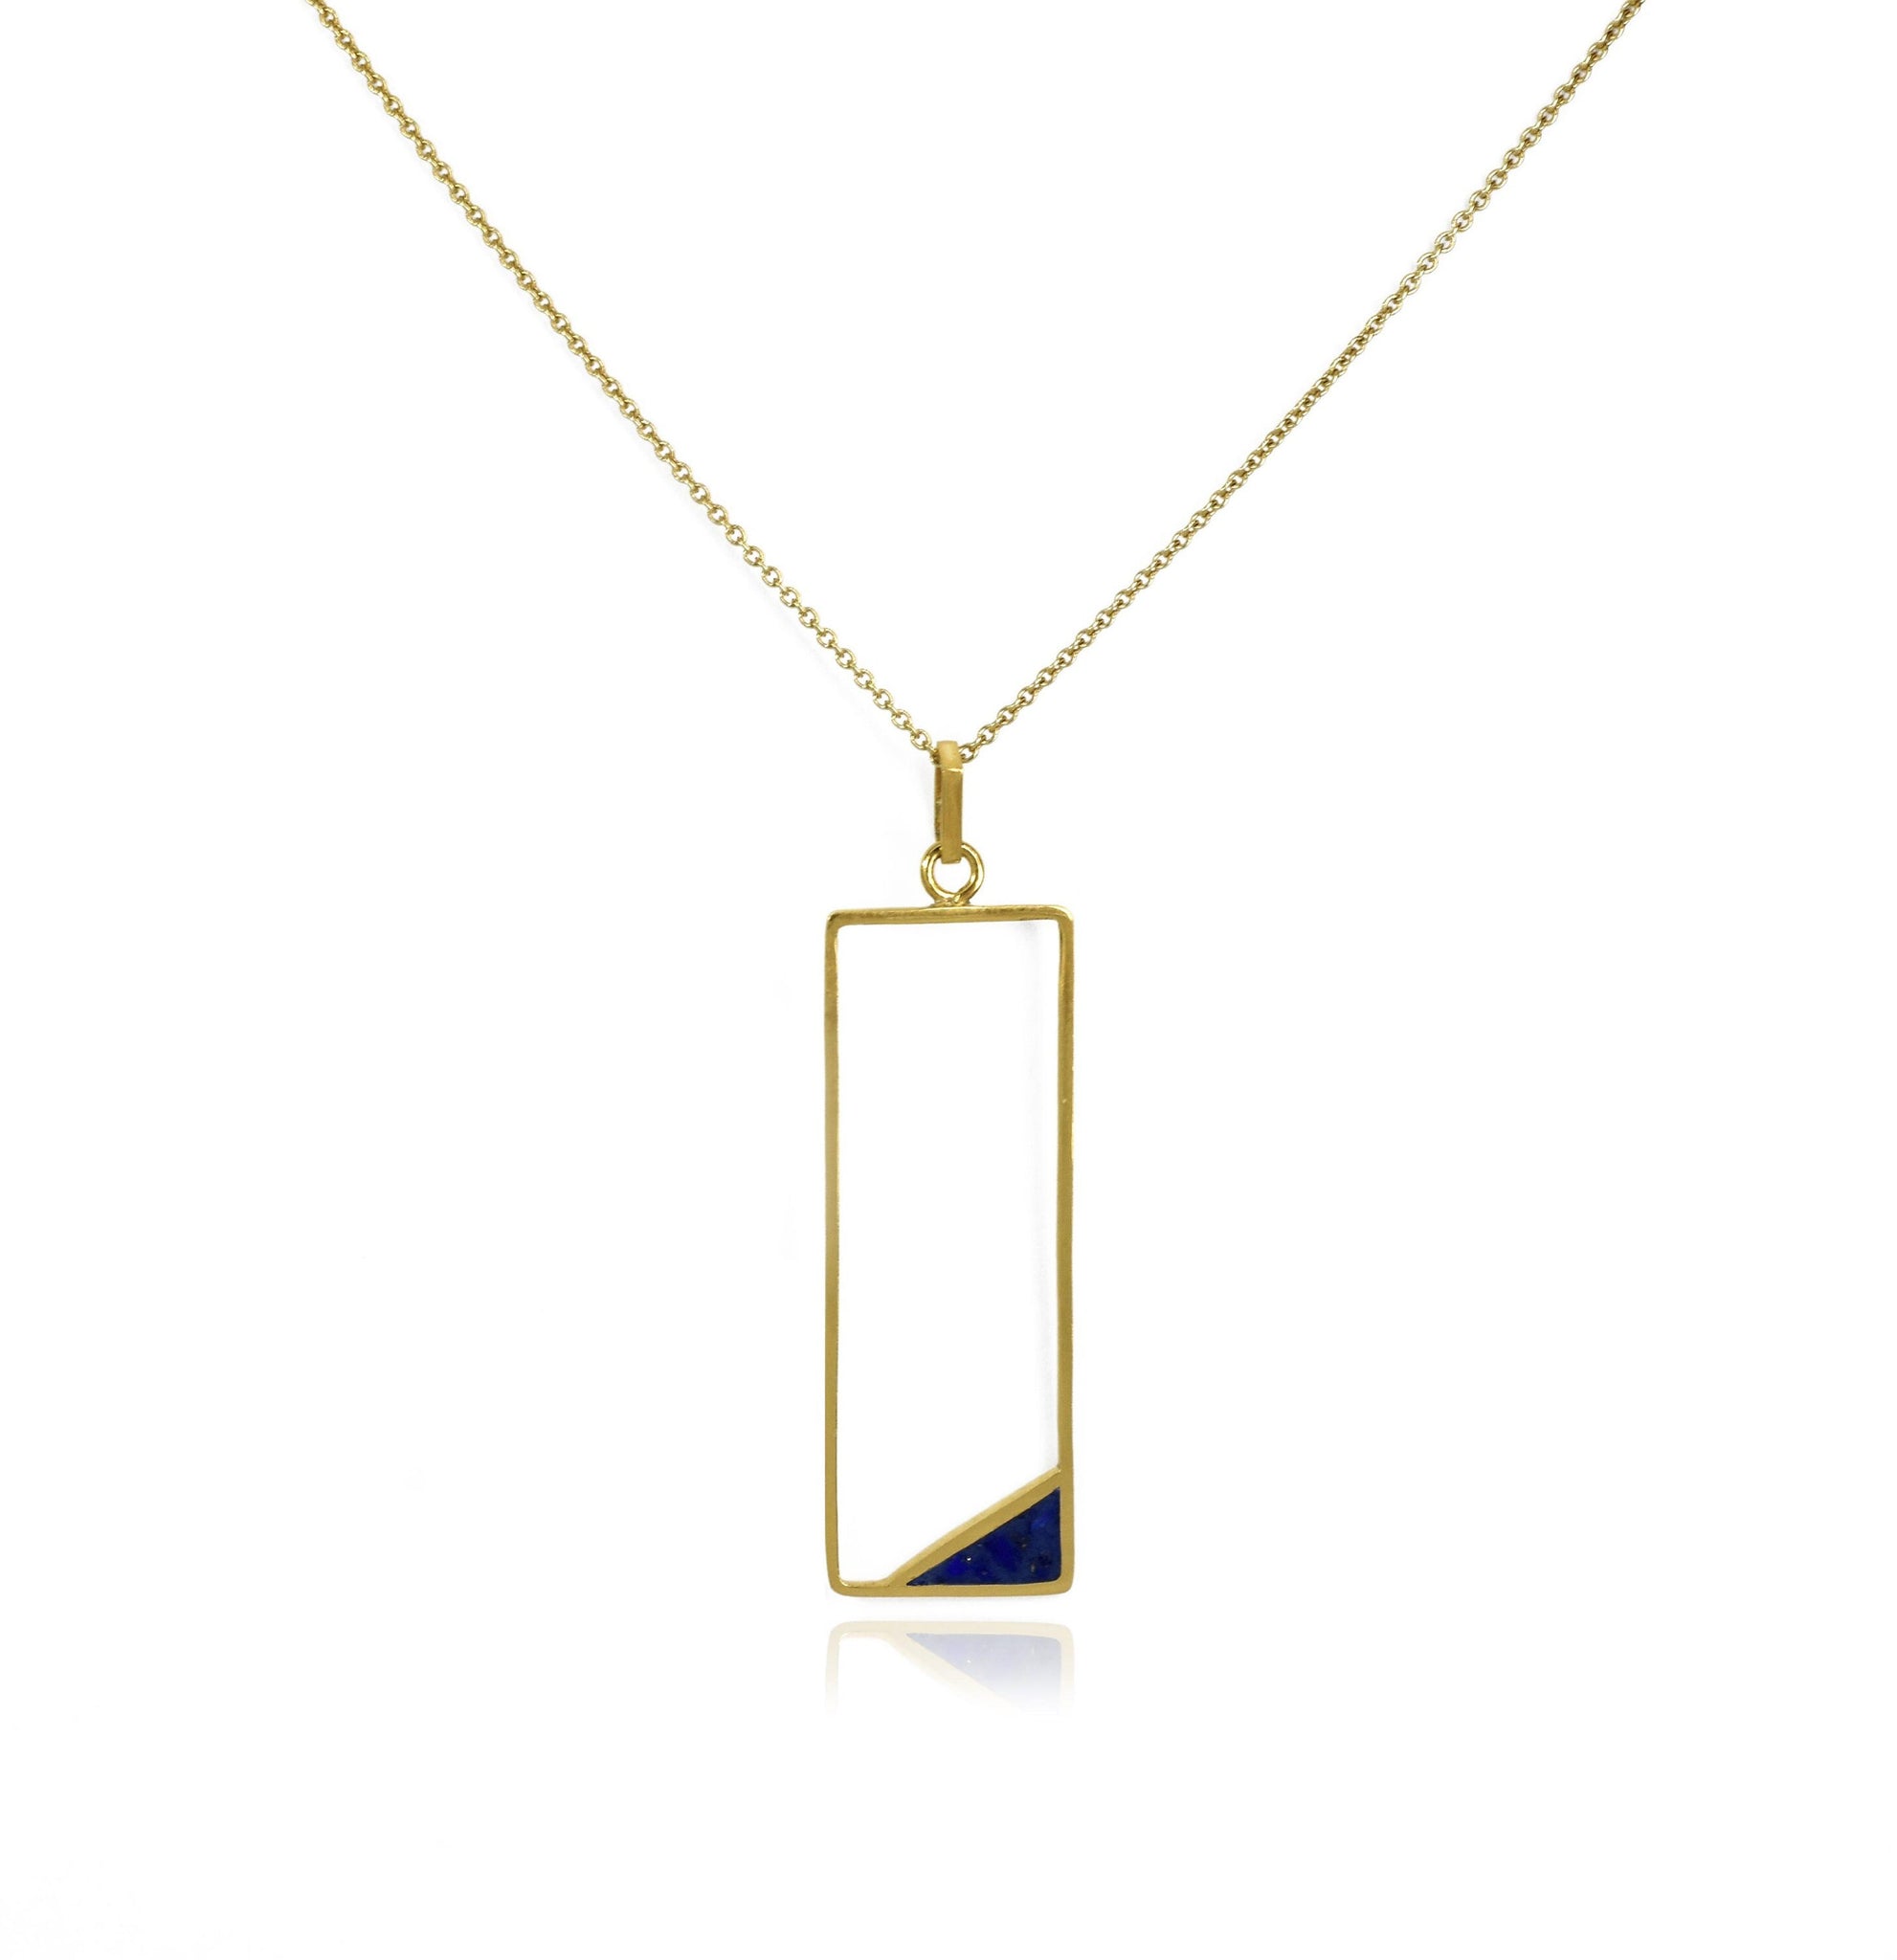 Handmade Afghan Blue Gemstone Lapis Lazuli Pendant Gold Brass Chain Necklace Elegant Inspired Jewelry Nature Mountain Abstract Gift for Her